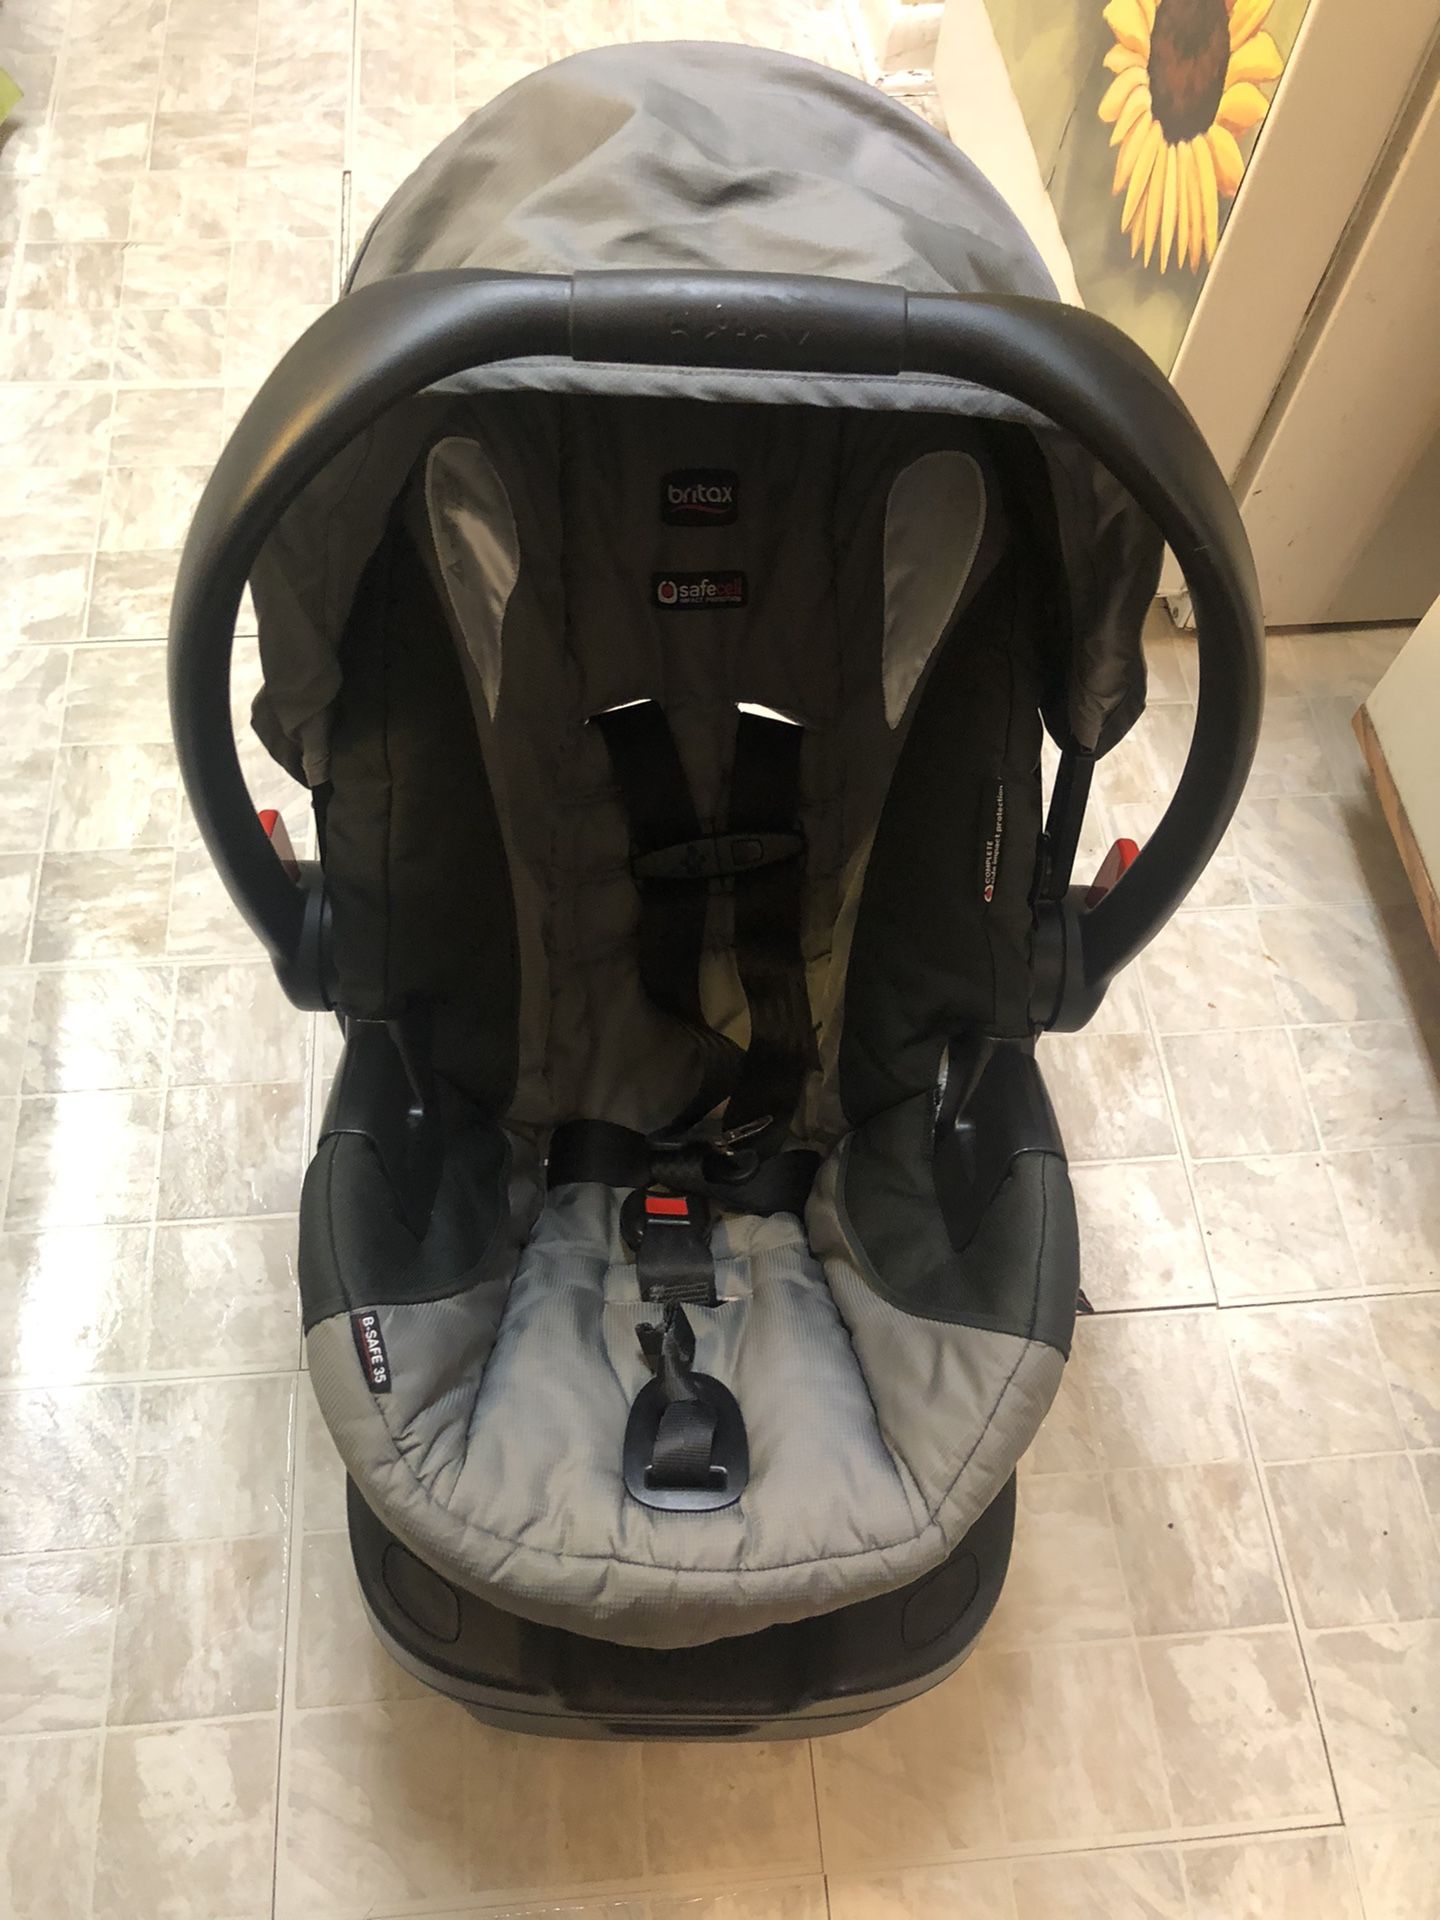 Excellent Condition Britax Car seat For Infant Until 2 Years Old ..